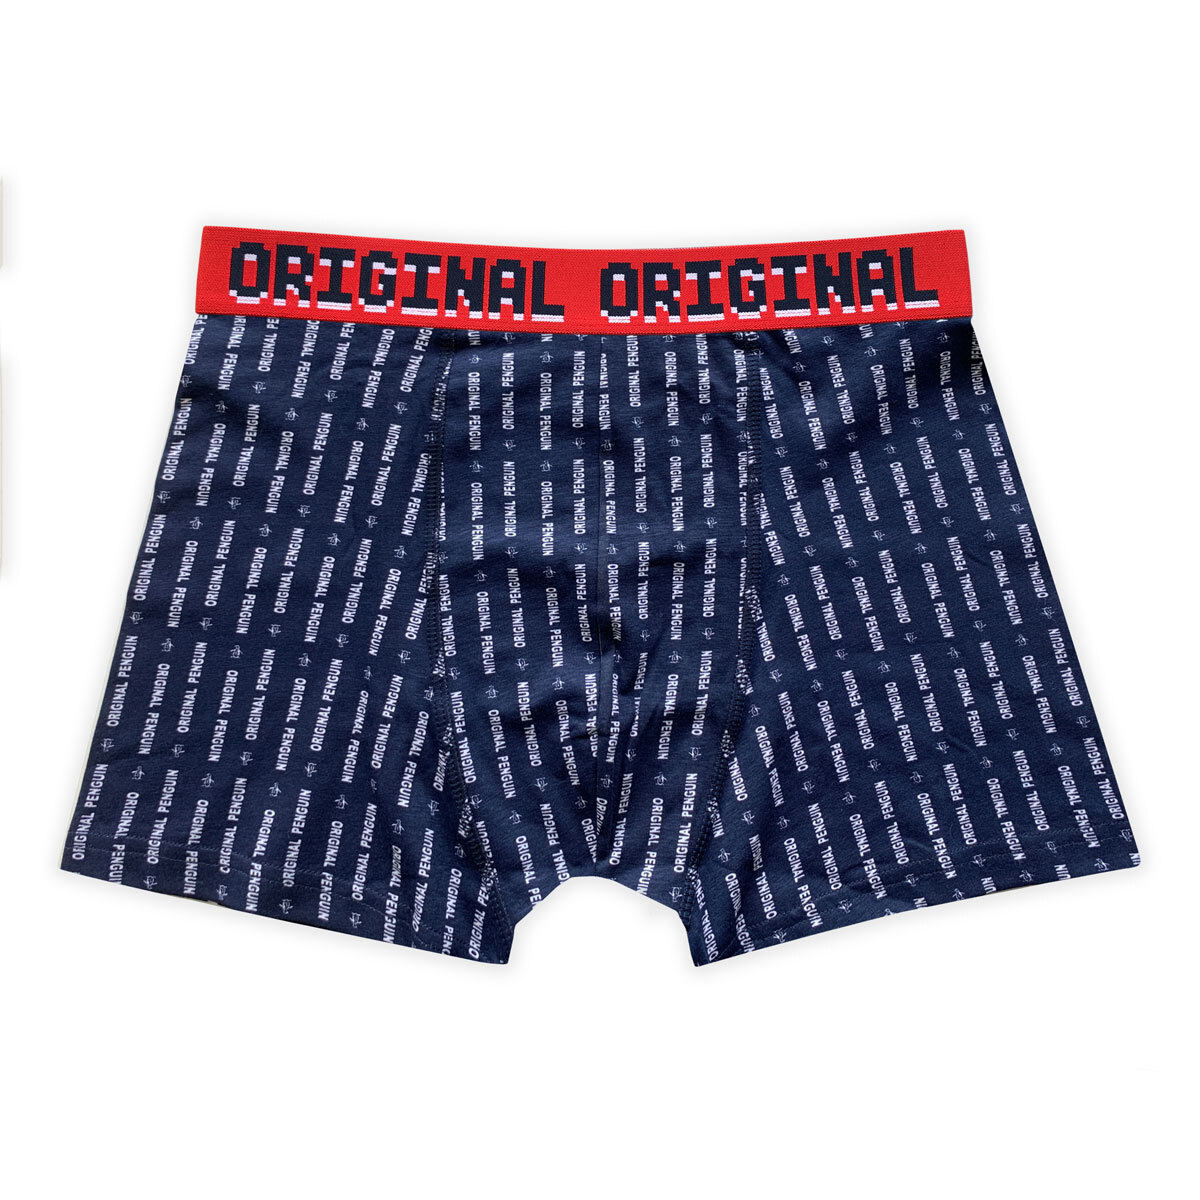 Original Penguin Men's 6 Pack Boxer Shorts in Navy and Wine, 4 Sizes